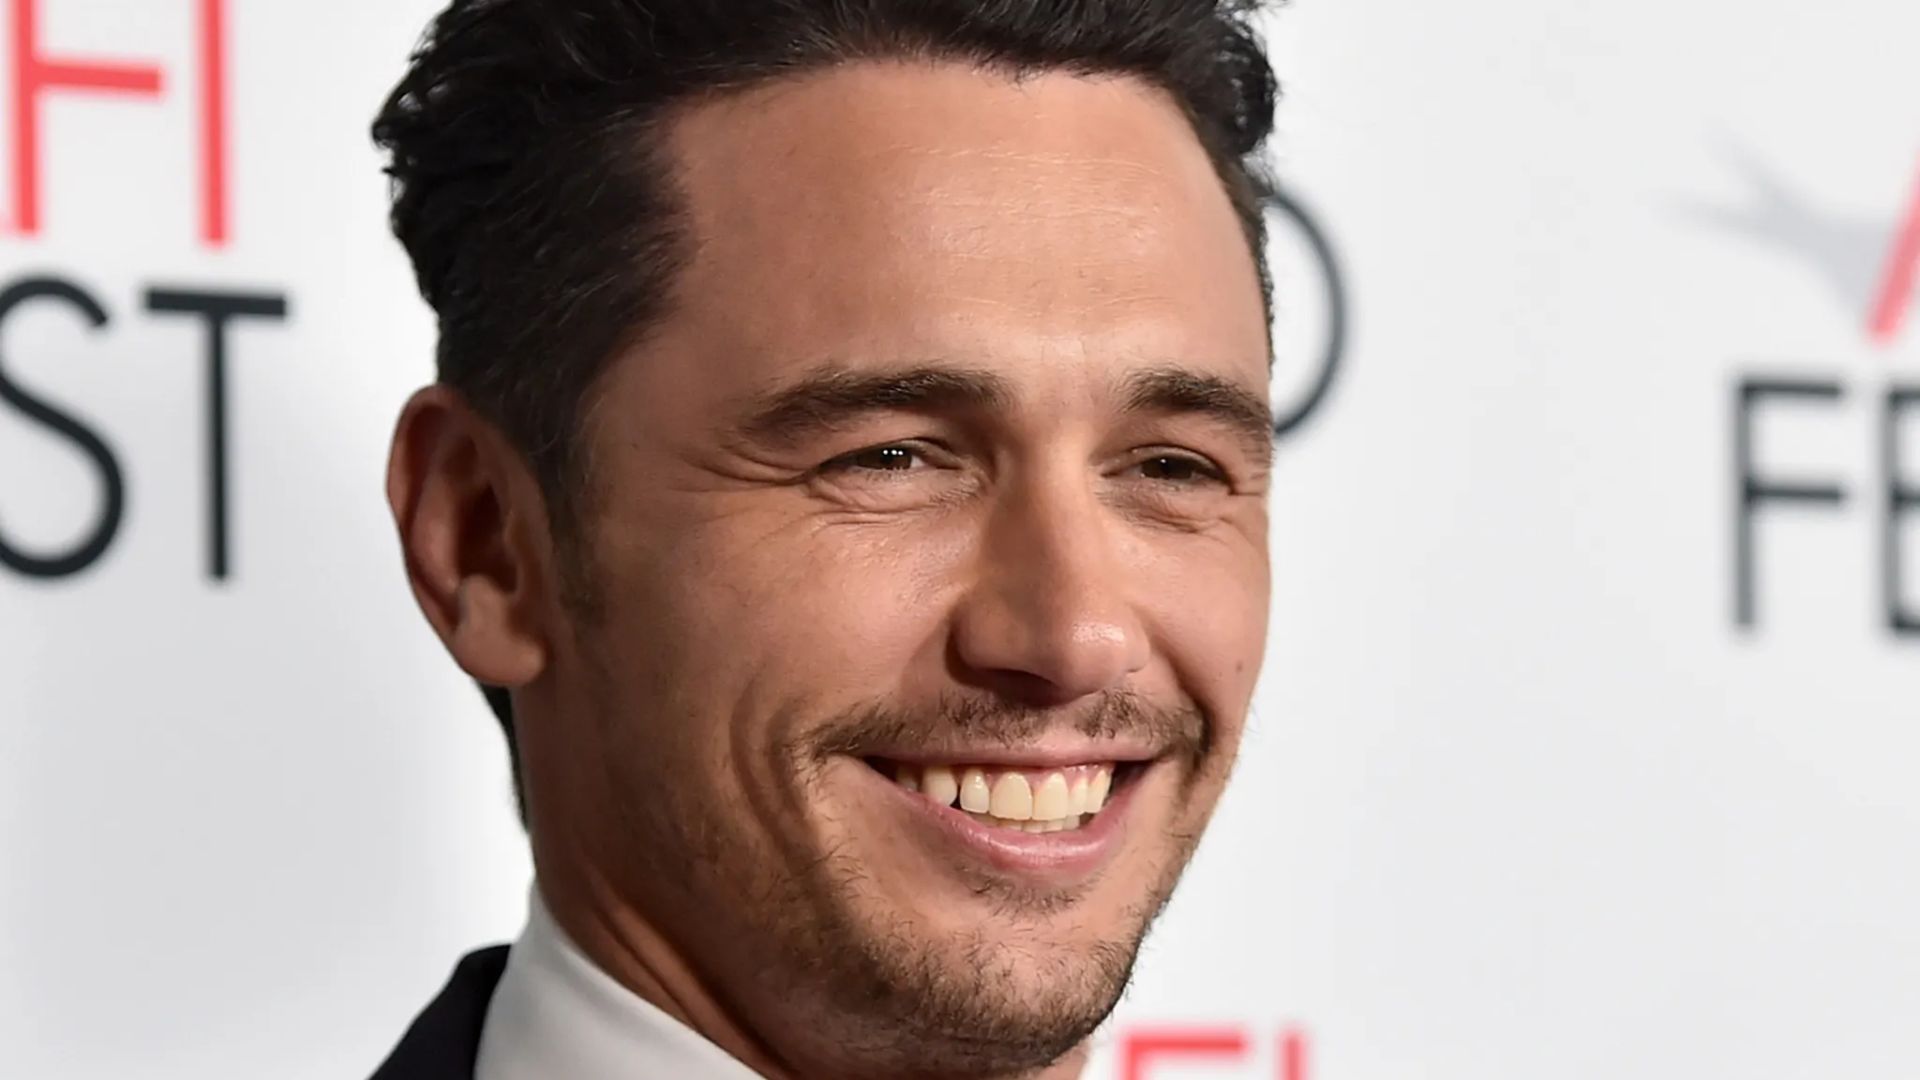 James Franco With Smiling Face